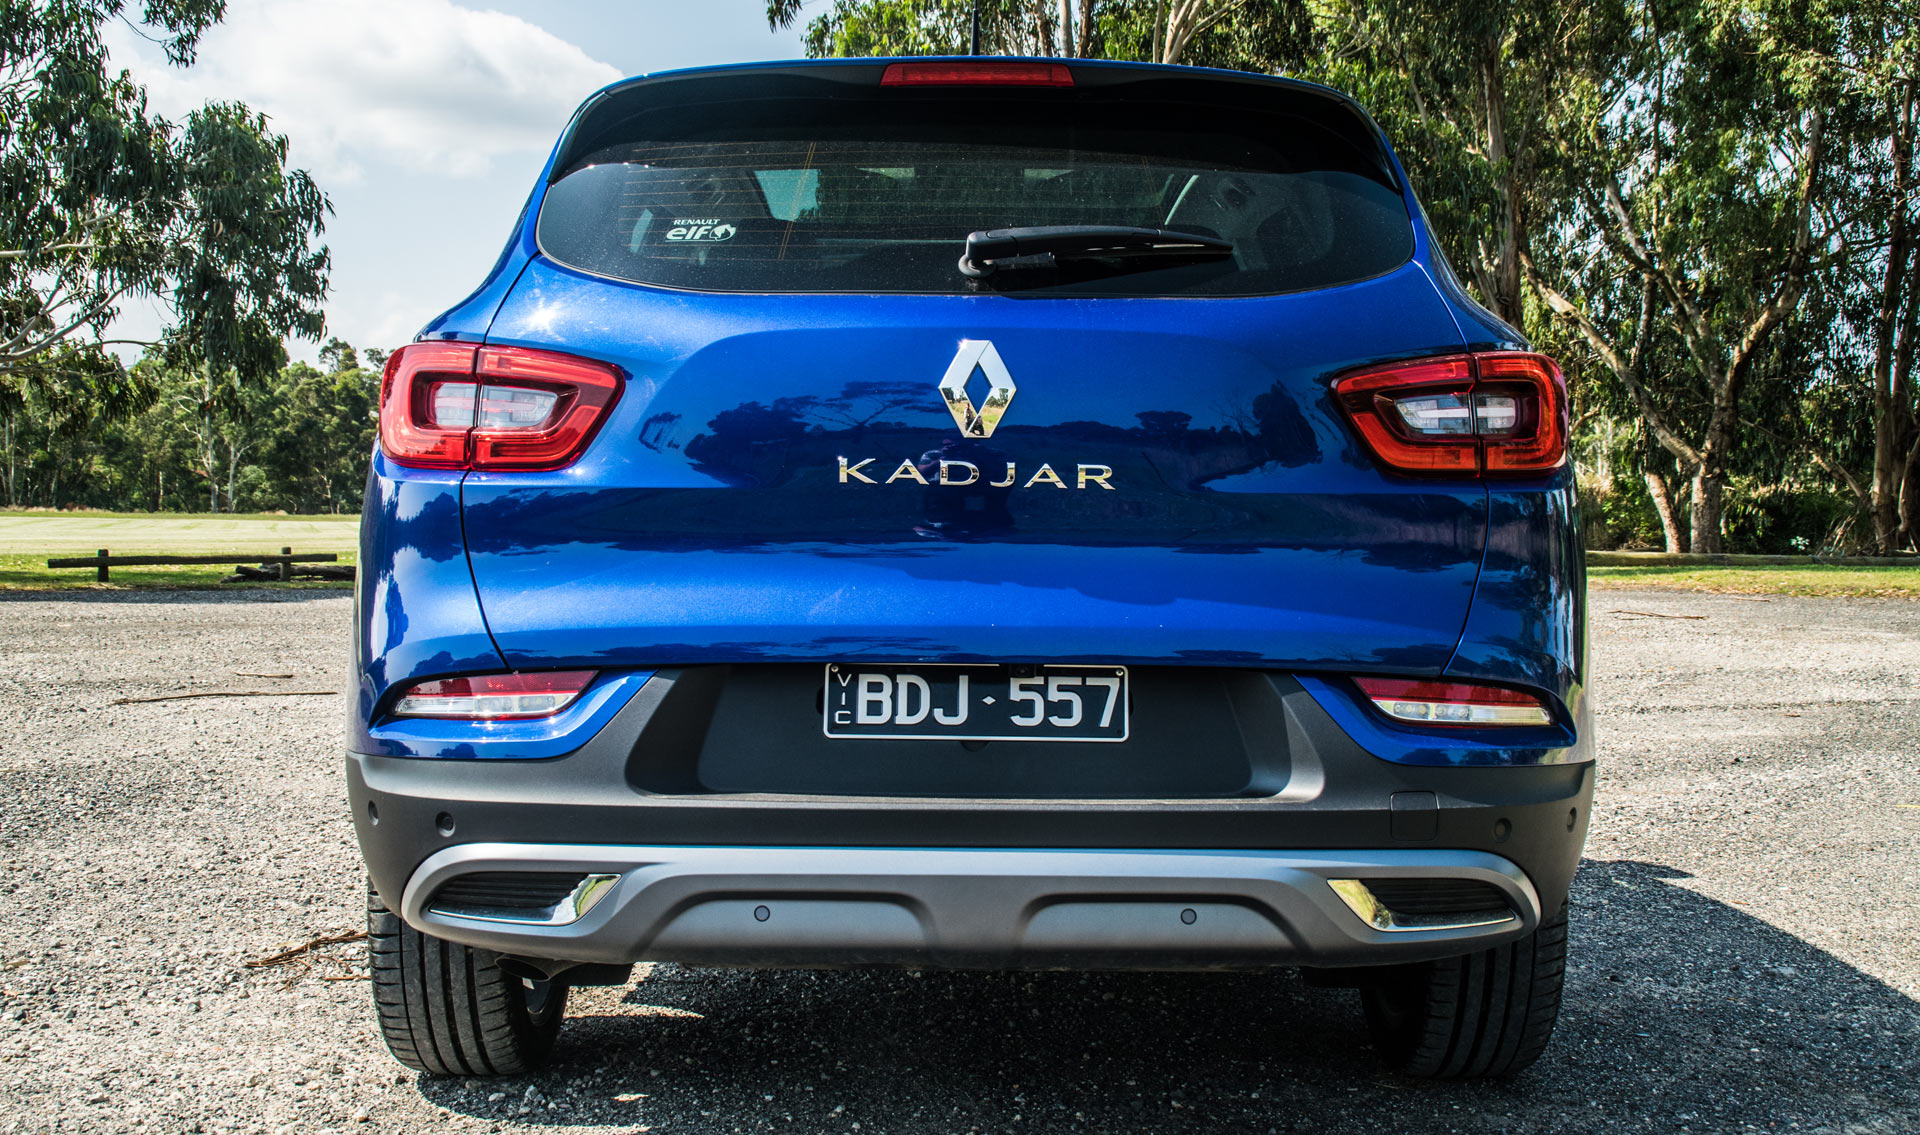 fusionere bur Scan Driven: 2020 Renault Kadjar Intens Shines As A Great All-Rounder | Carscoops